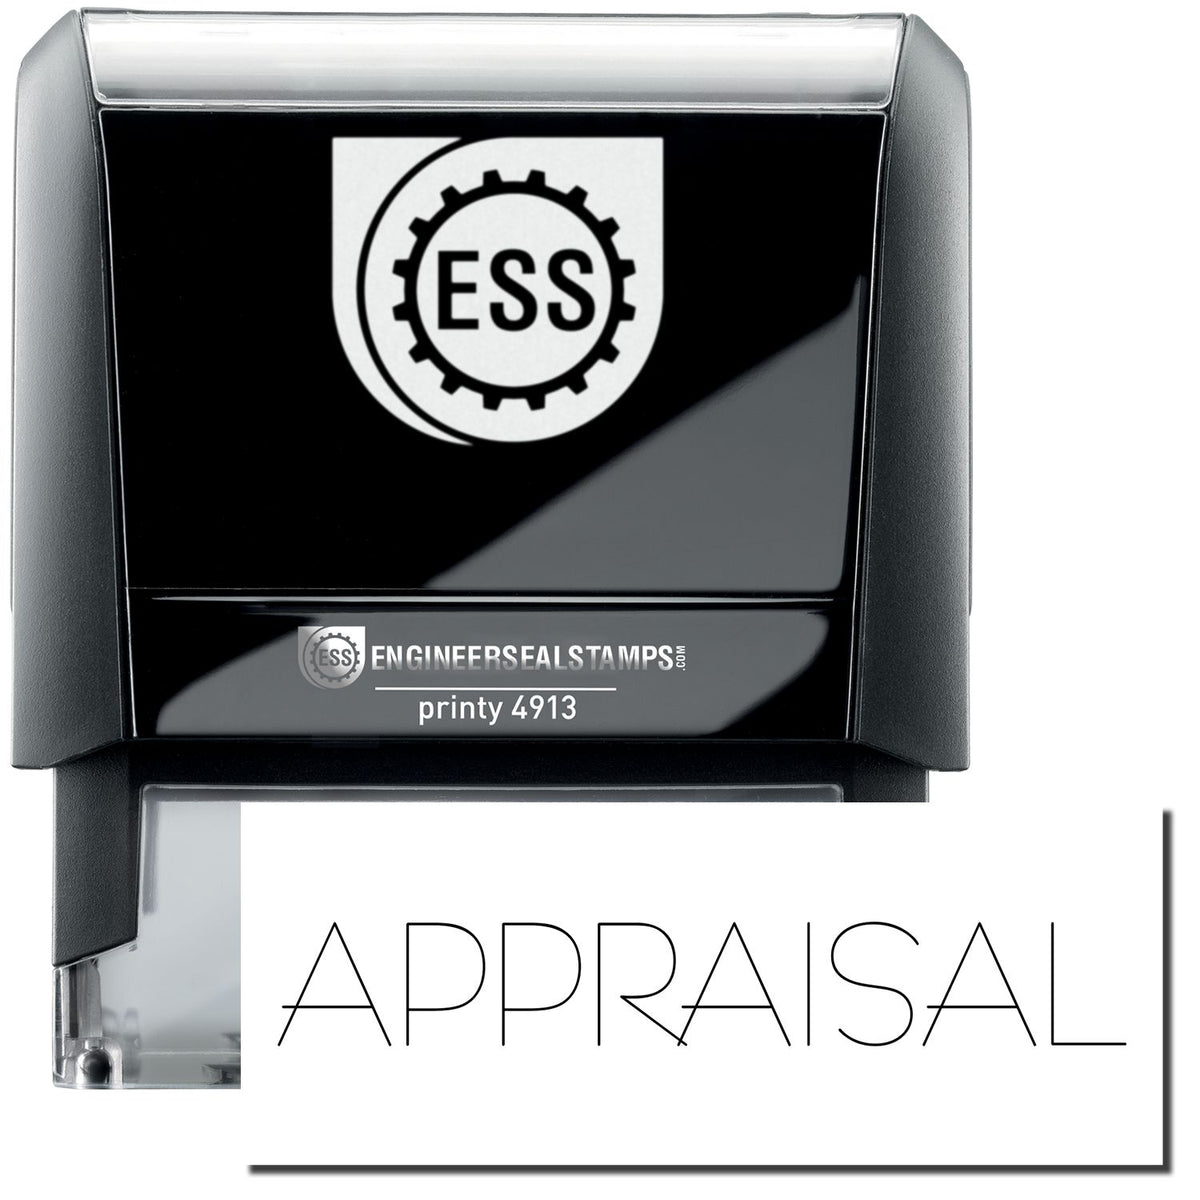 A self-inking stamp with a stamped image showing how the text &quot;APPRAISAL&quot; in a unique-looking font is displayed by it.